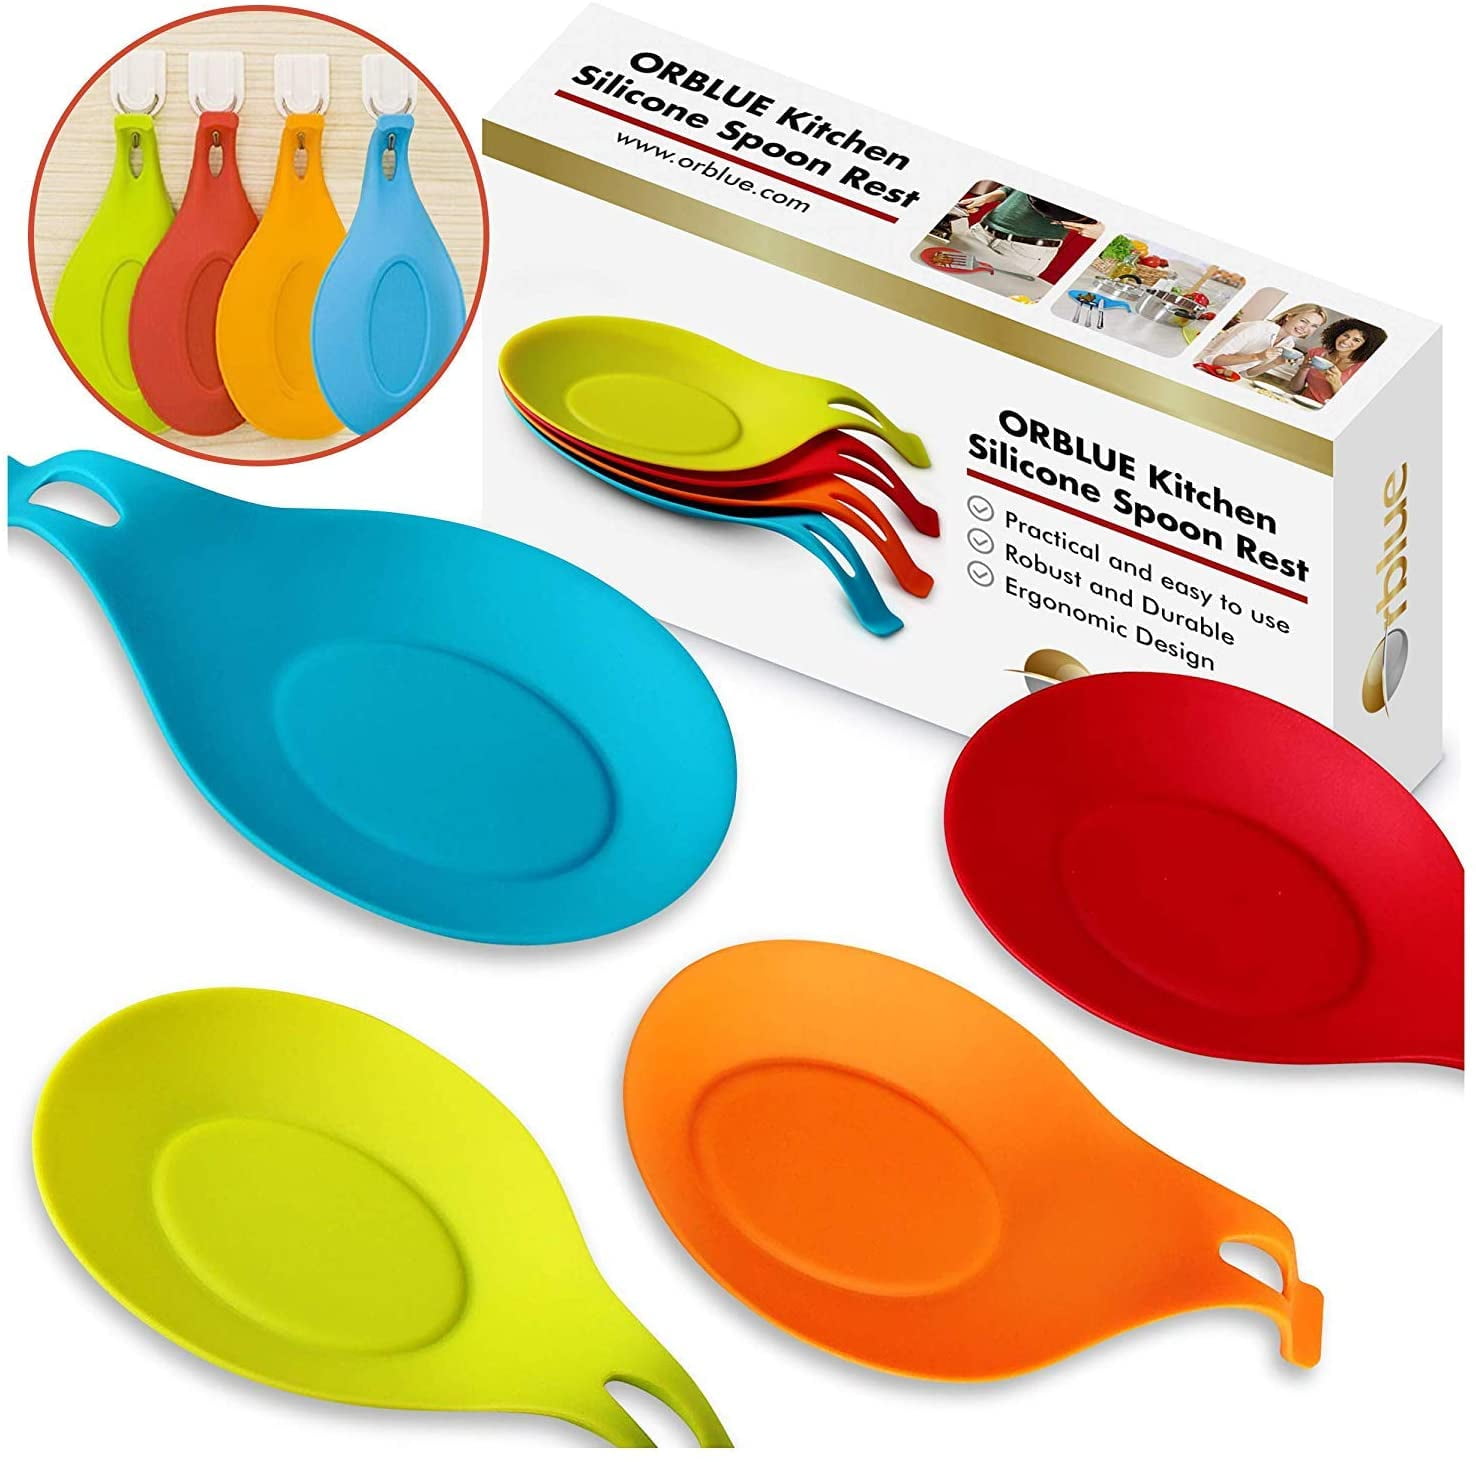 Utensil Rest With Drip Pad Include 5 Slots & 1 Spoon Holder Hang Hole Design Kitchen Spoon Holder AUTOECHO Silicone Spoon Rest 2 In 1 Spoon Holder For Stove Top Easy To Clean